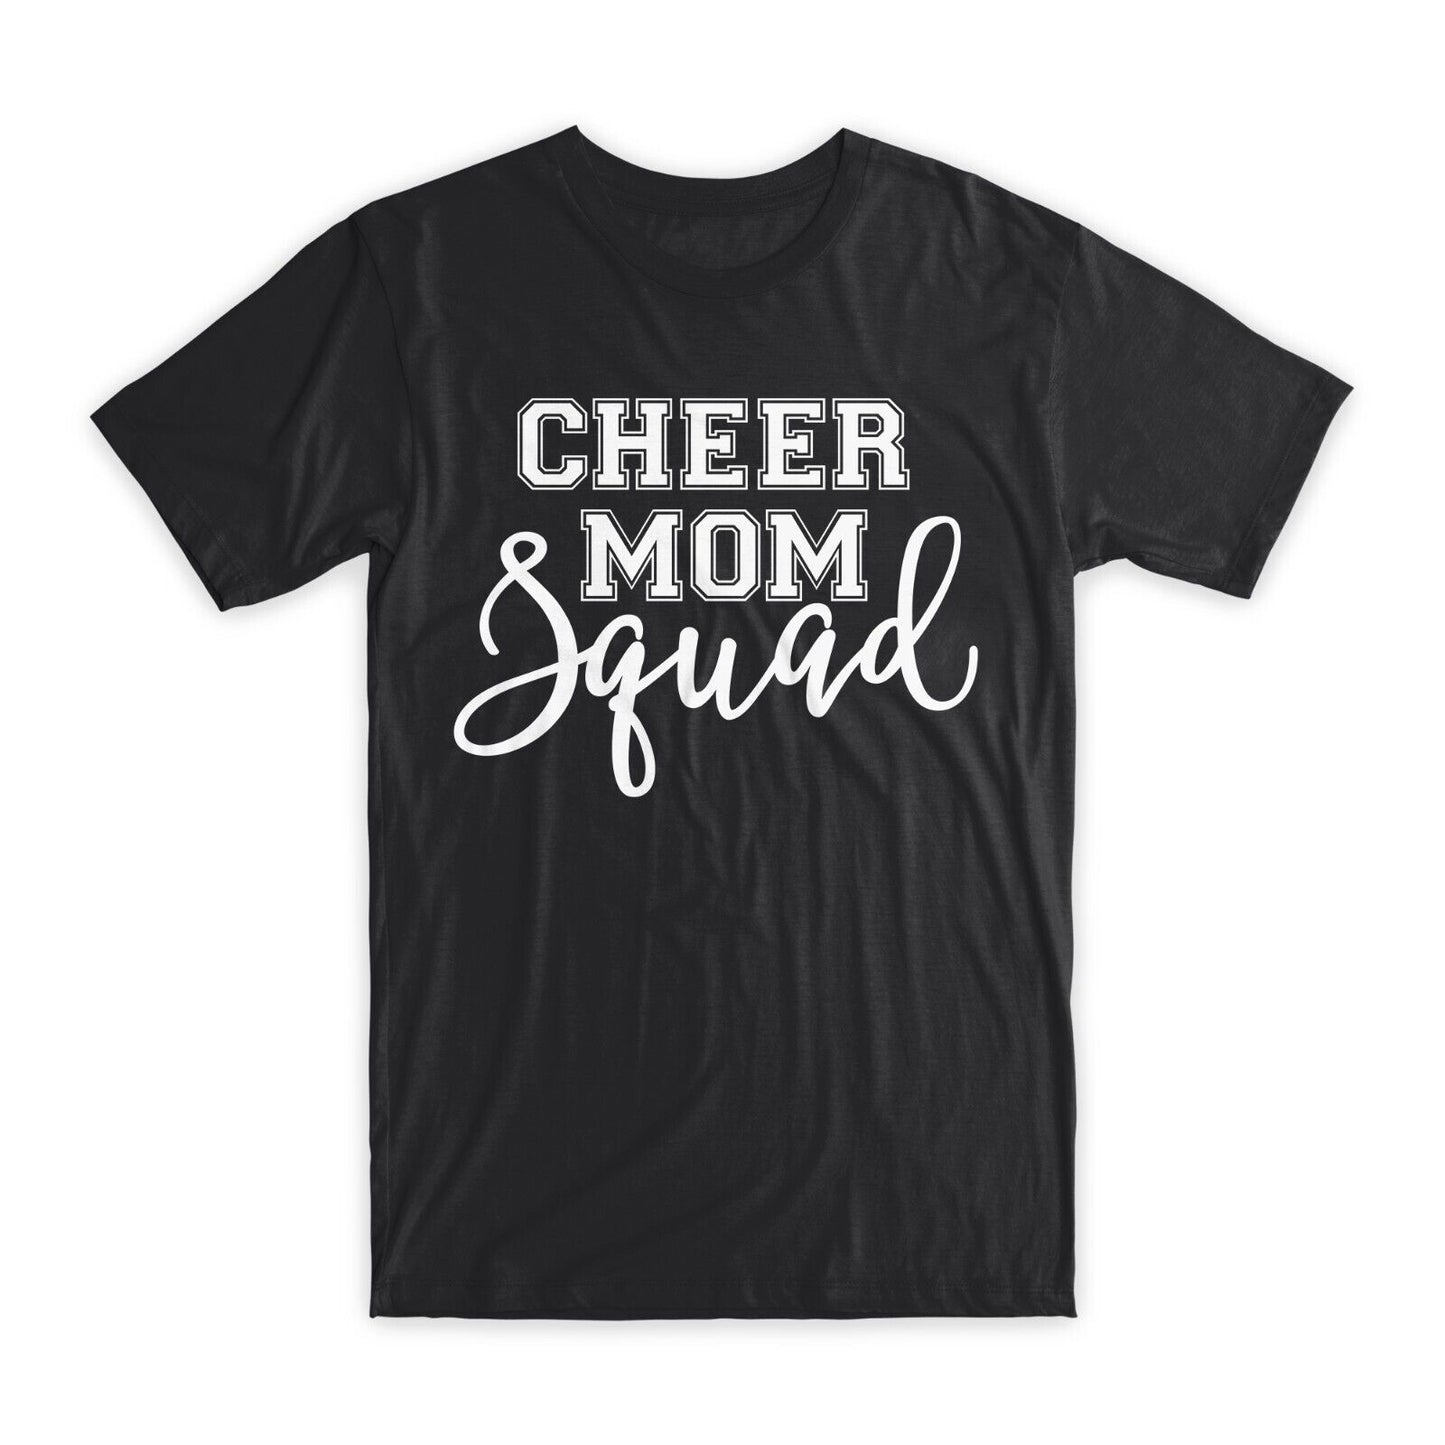 Cheer Mom Squad T-Shirt Premium Soft Cotton Crew Neck Funny Tee Novelty Gift NEW